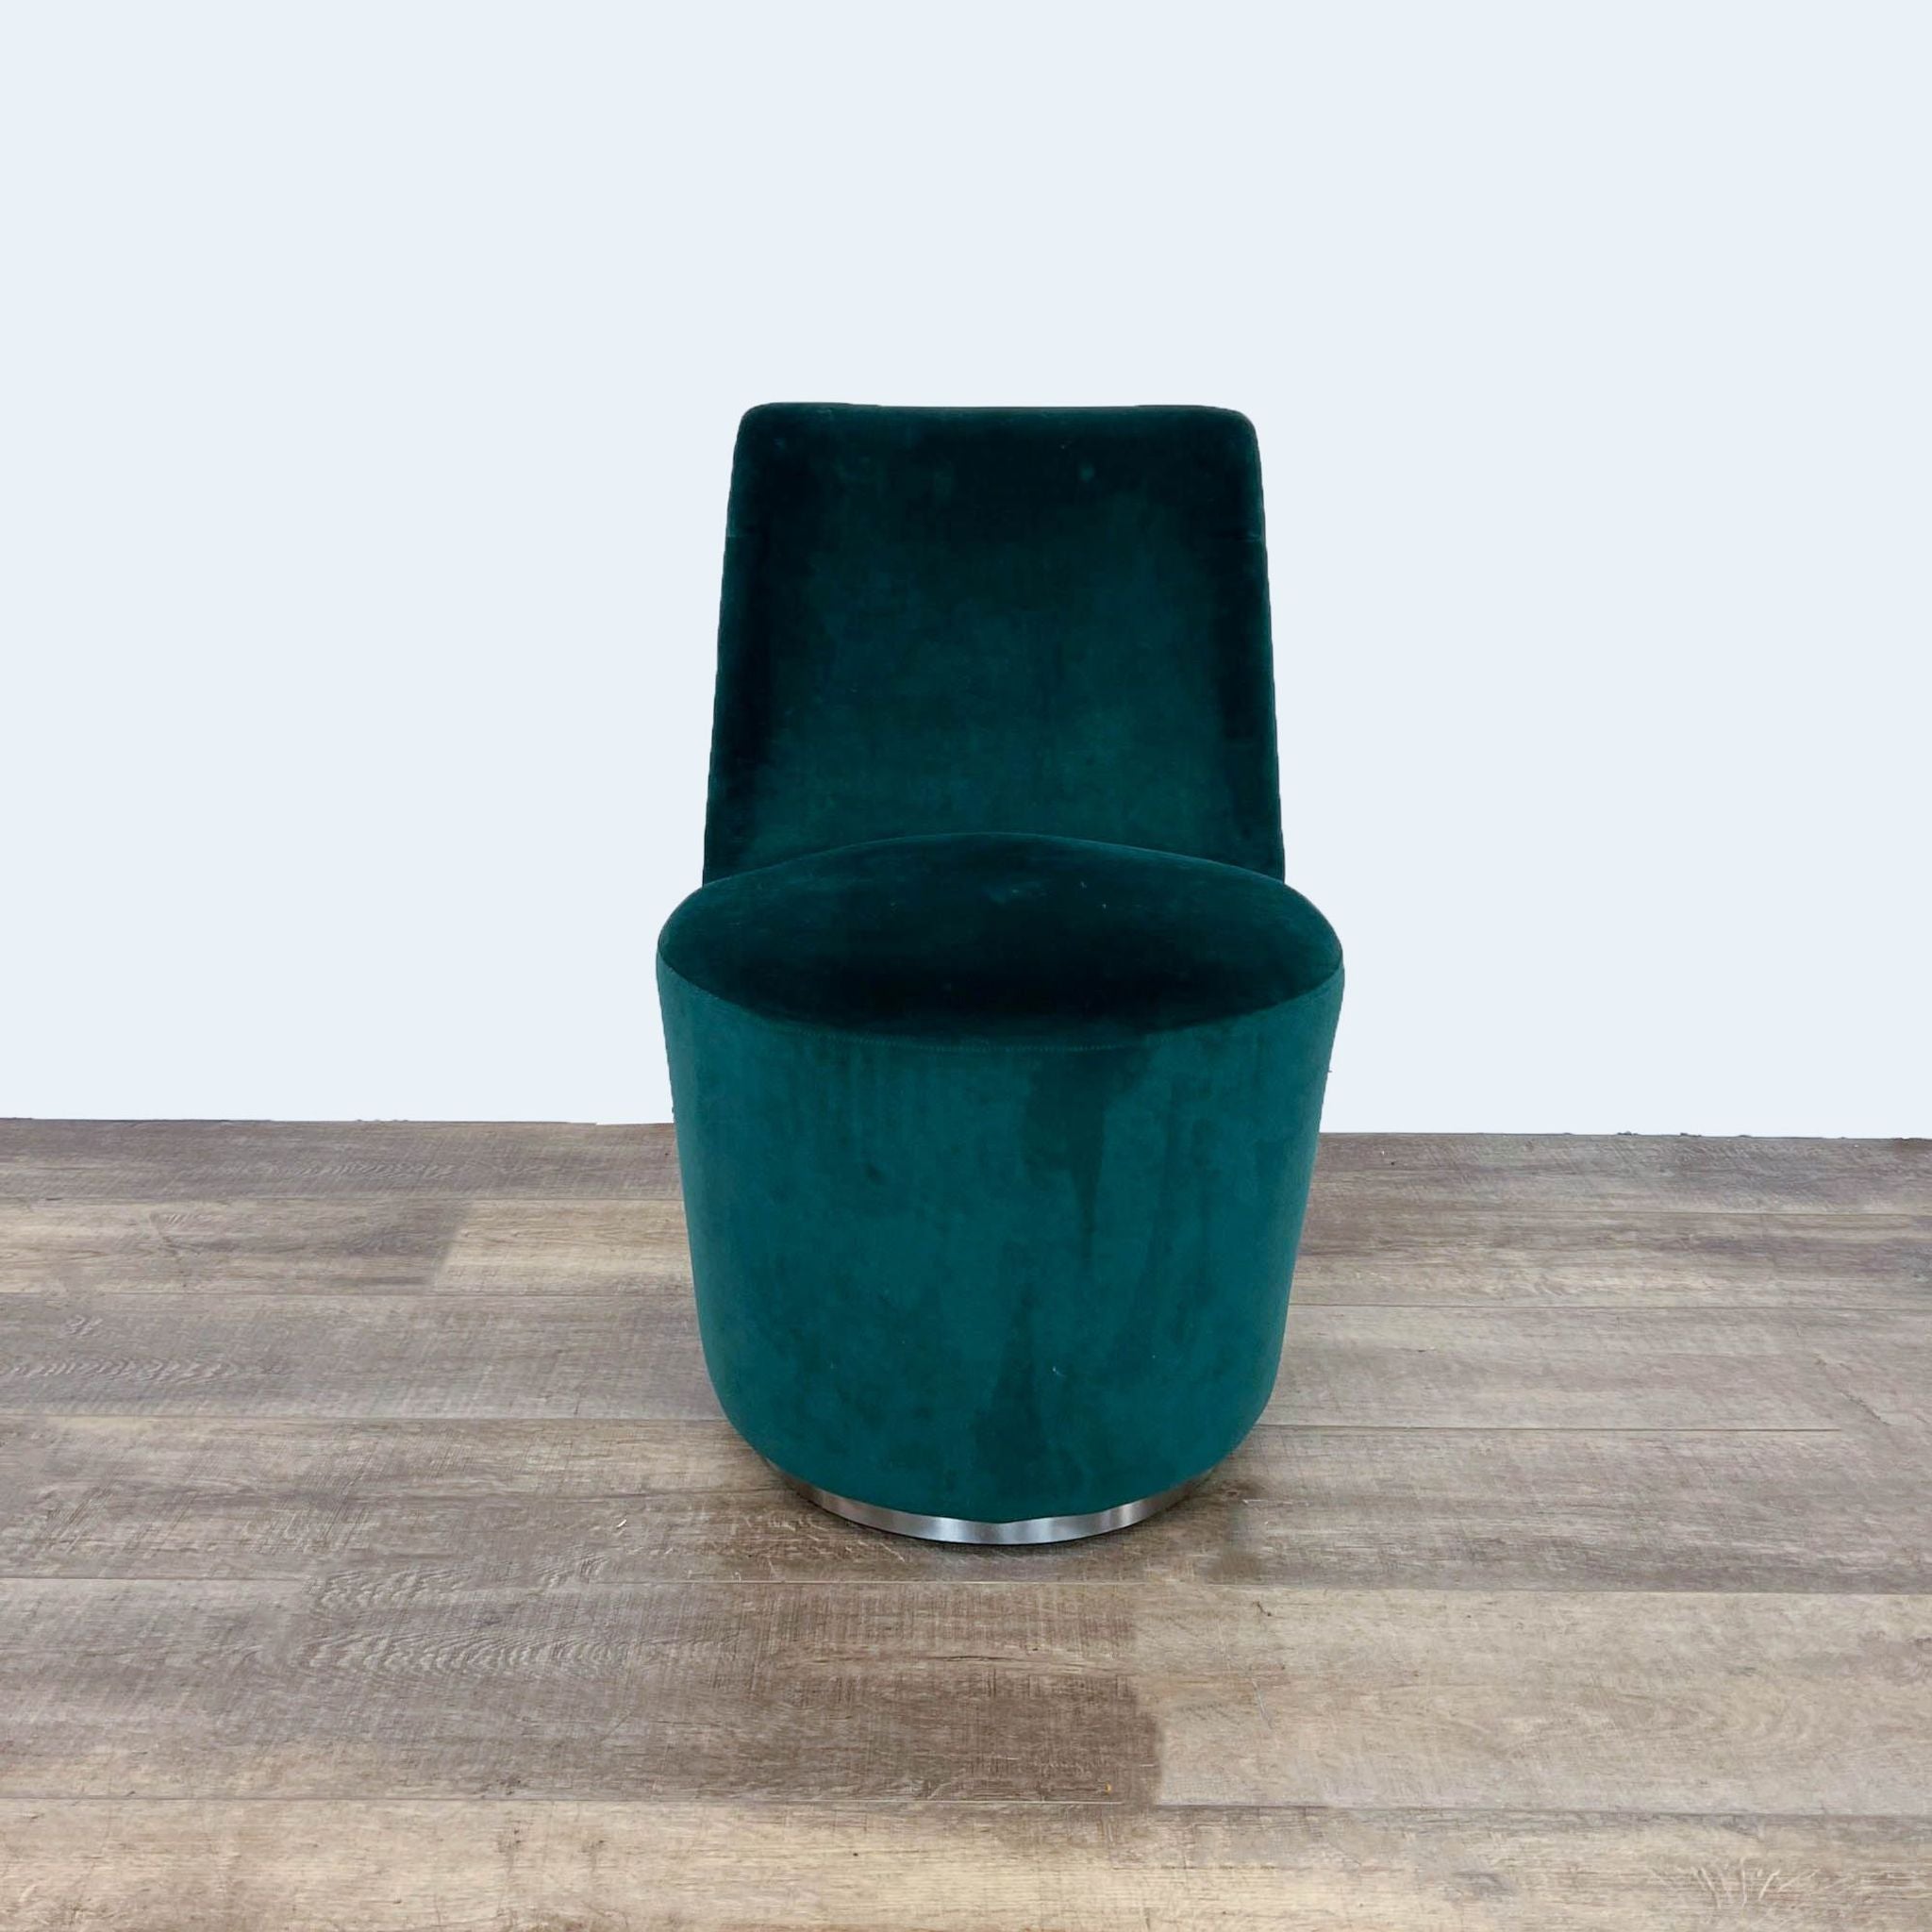 Hunter green Crate & Barrel Ofelia dining chair with velvet upholstery and swivel base on a wood floor.